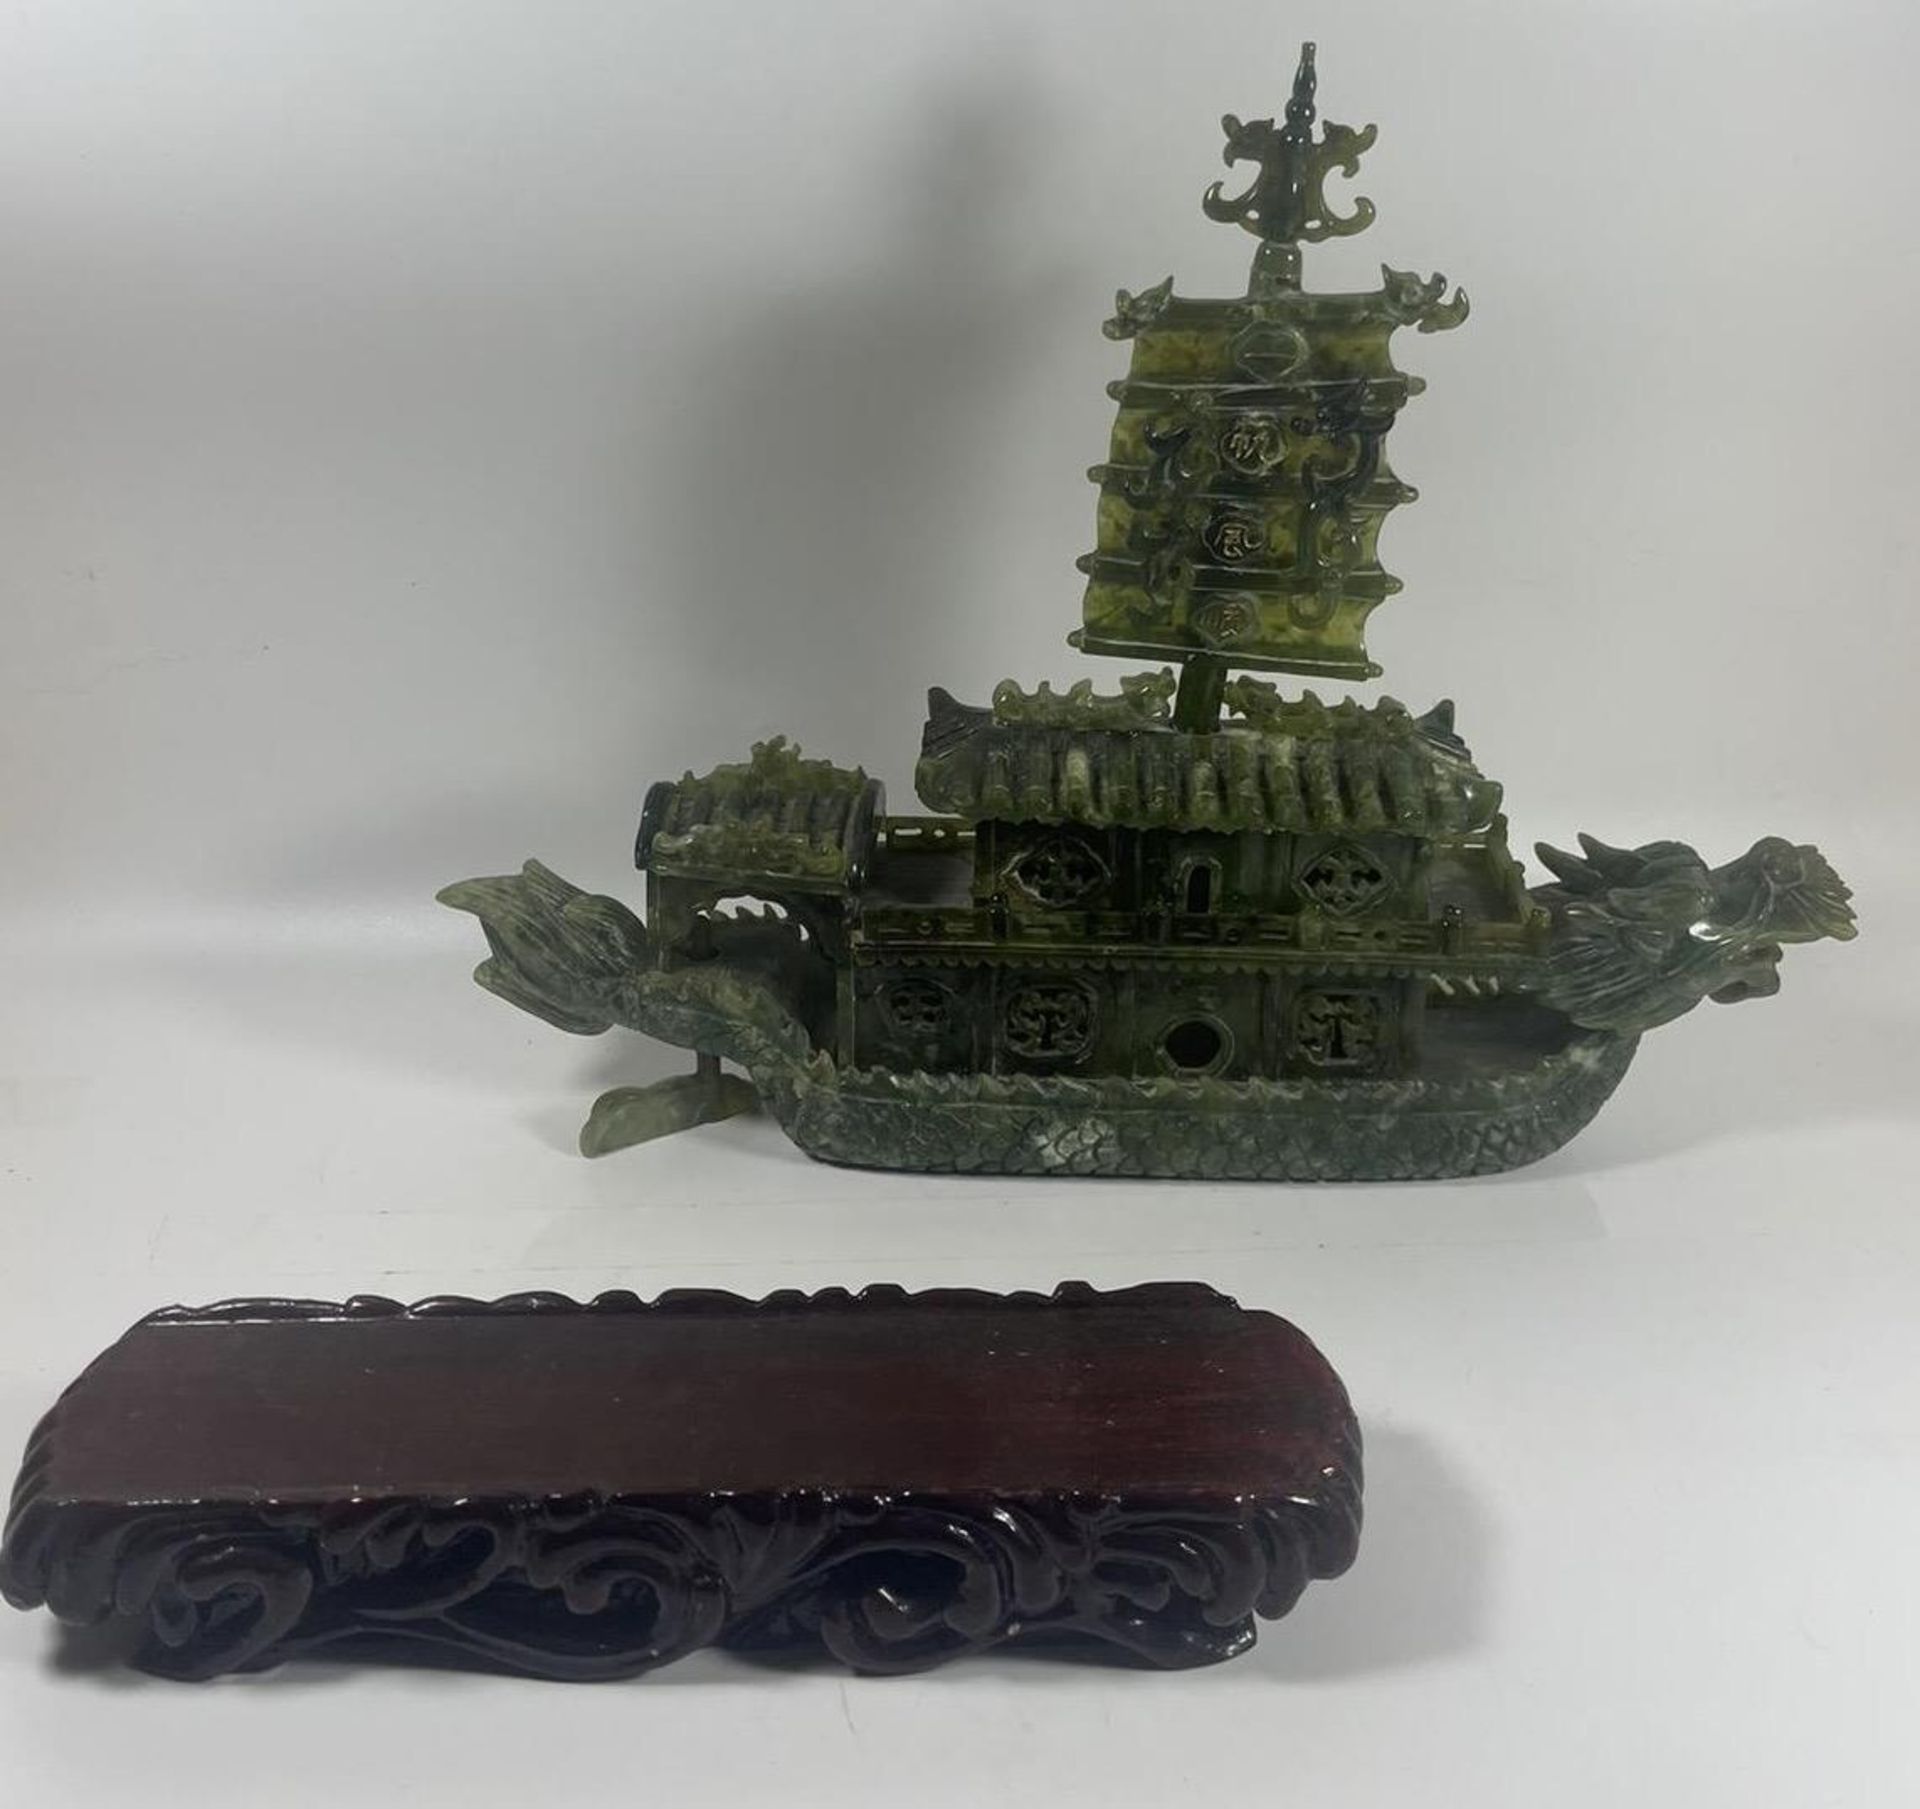 A CHINESE CARVED JADE TYPE GREEN HARDSTONE DRAGON DESIGN BOAT SCULPTURE ON WOODEN BASE, LENGTH 34CM - Image 3 of 6